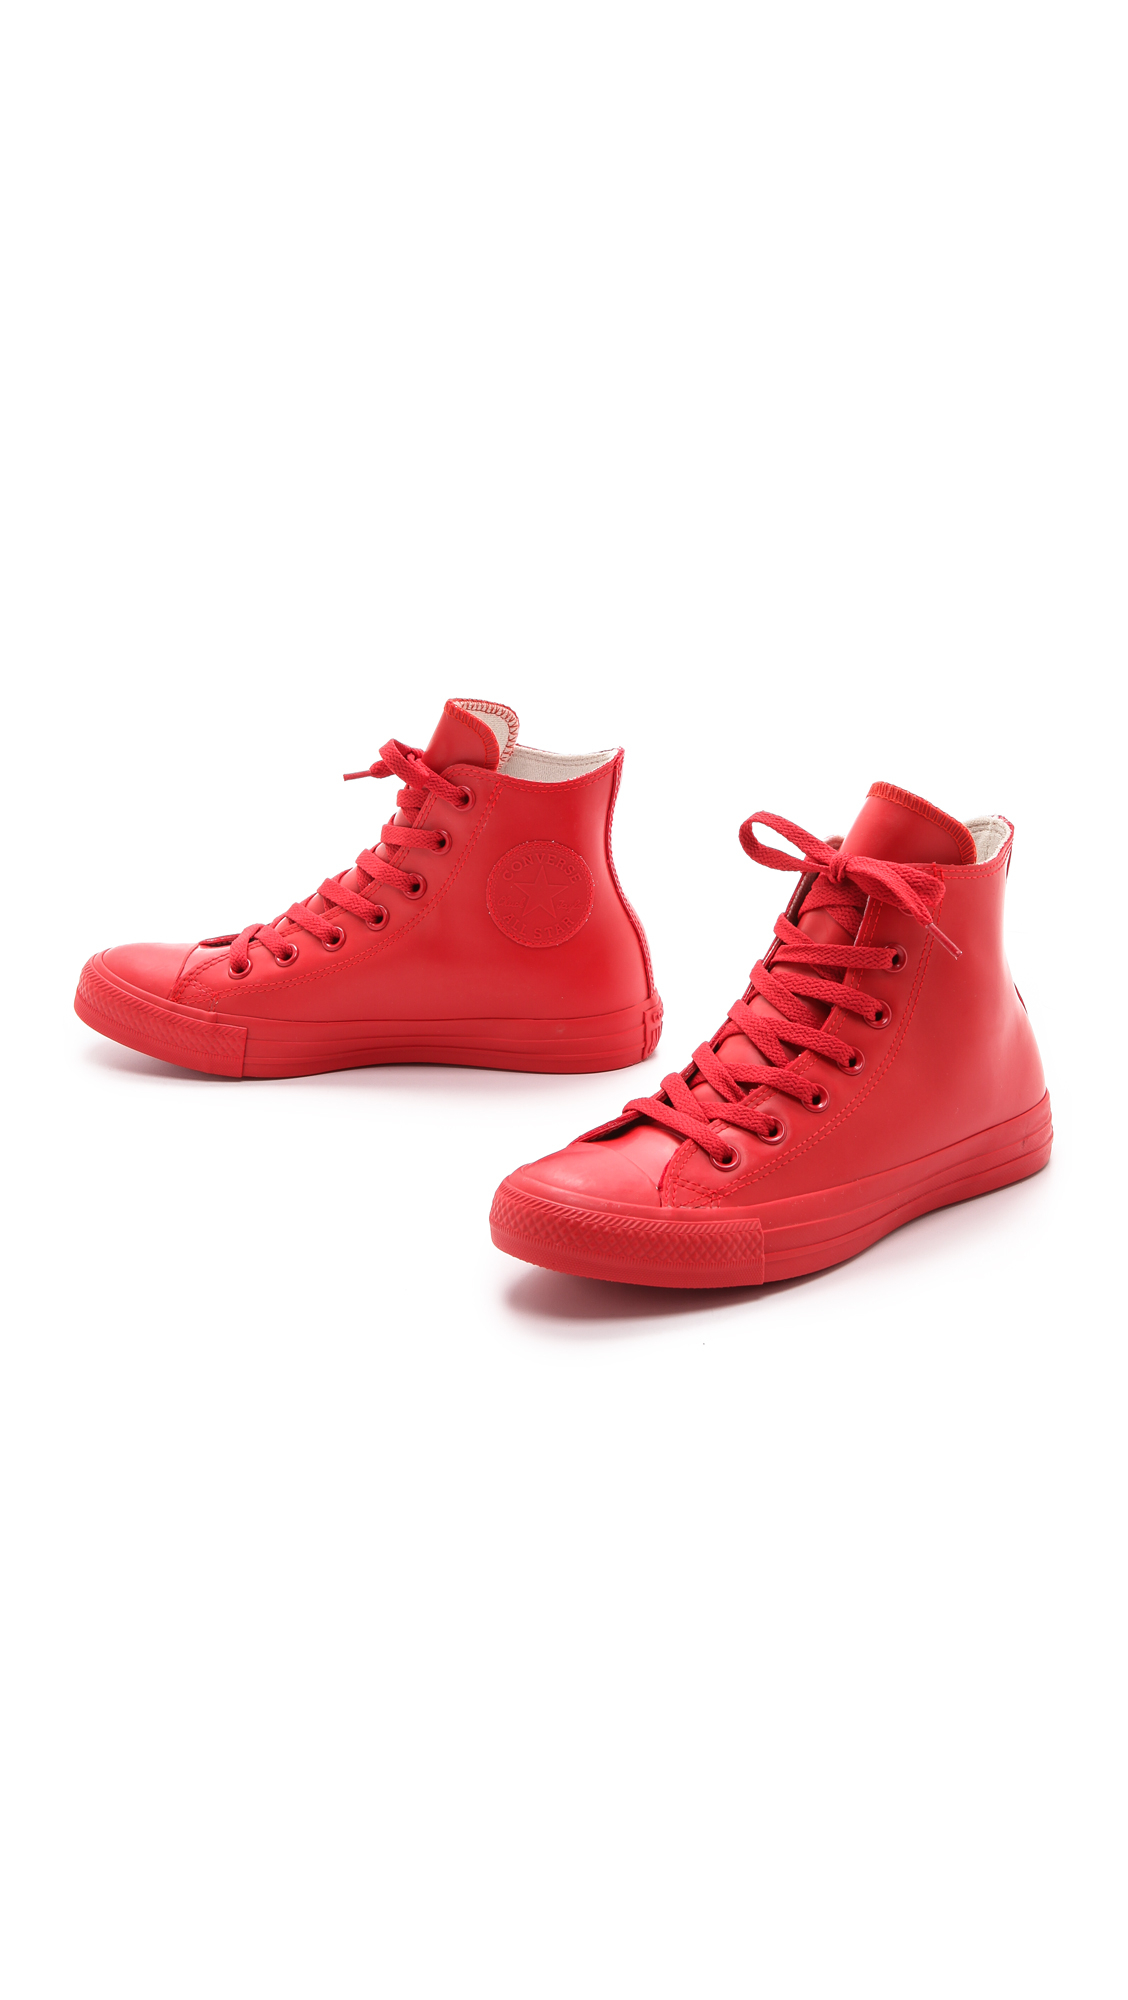 Converse Rubber Coated Chuck Taylor All Star Sneakers - Red | Lyst